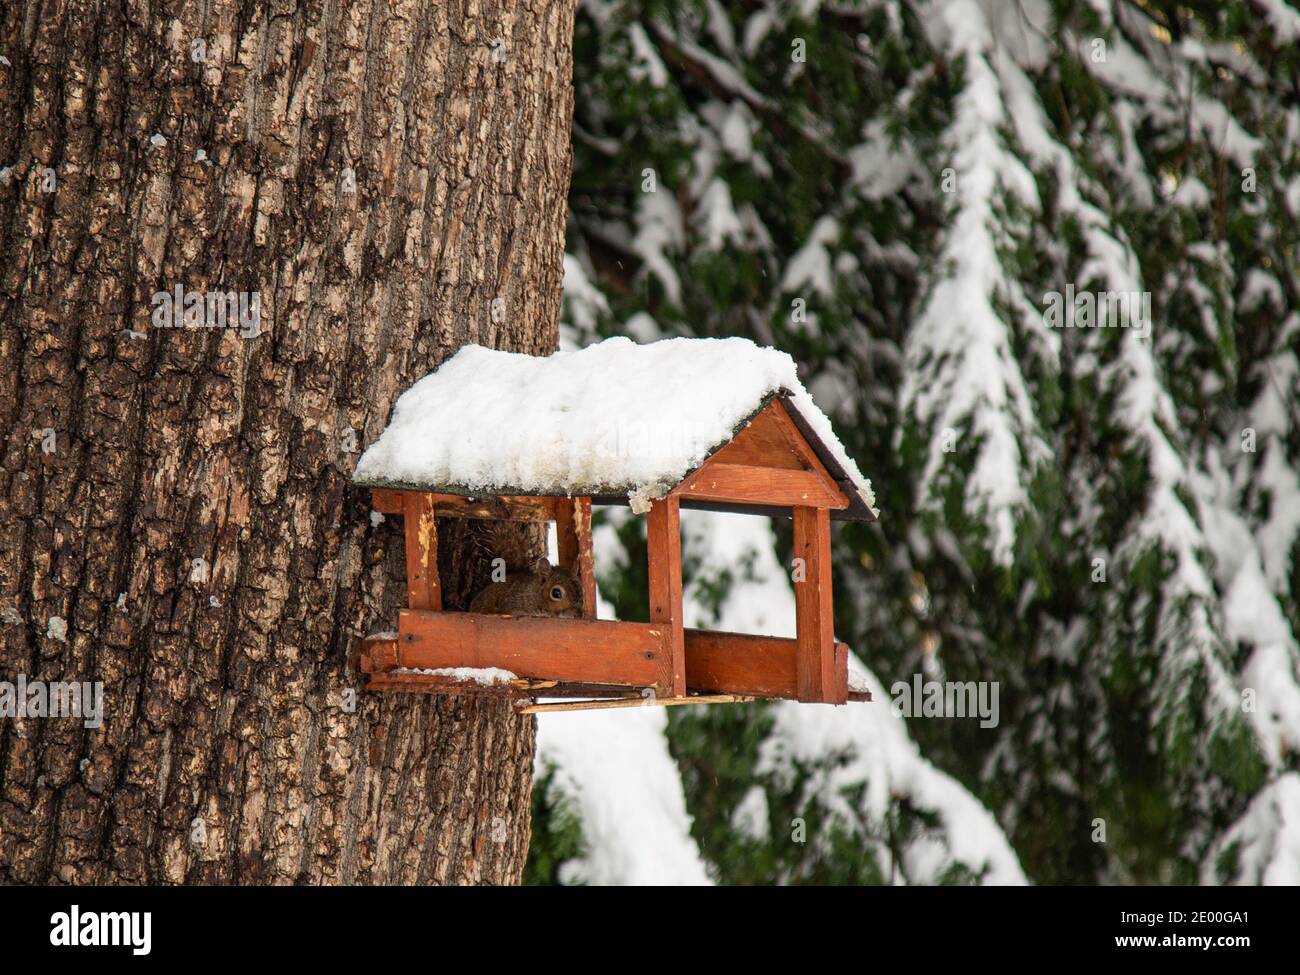 Milan, Italy. 28th Dec, 2020. Italy, Milan, Vanzago, chilled squirrel in his little house during a heavy snowfall. (Photo by Franco Re/Pacific Press) Credit: Pacific Press Media Production Corp./Alamy Live News Stock Photo